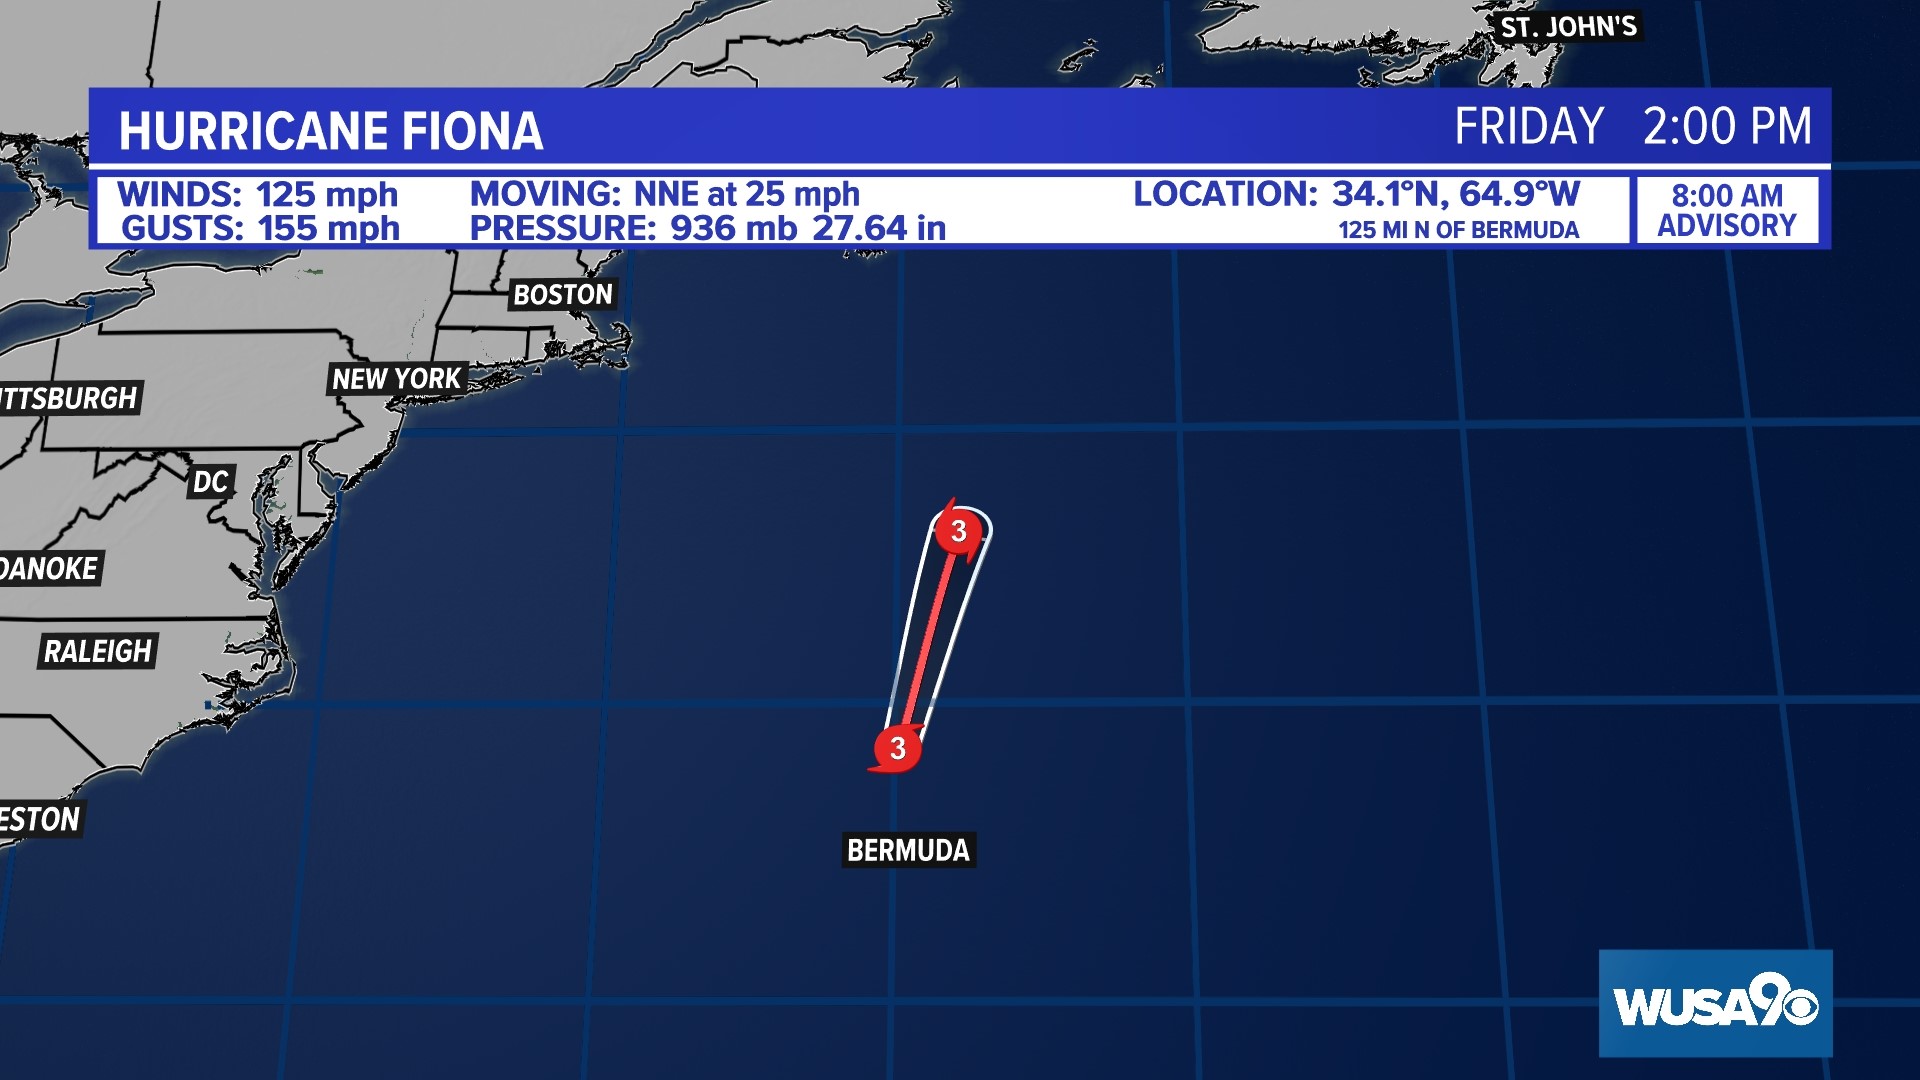 Fiona aims for Canada as tropical depression nine forms in the Caribbean